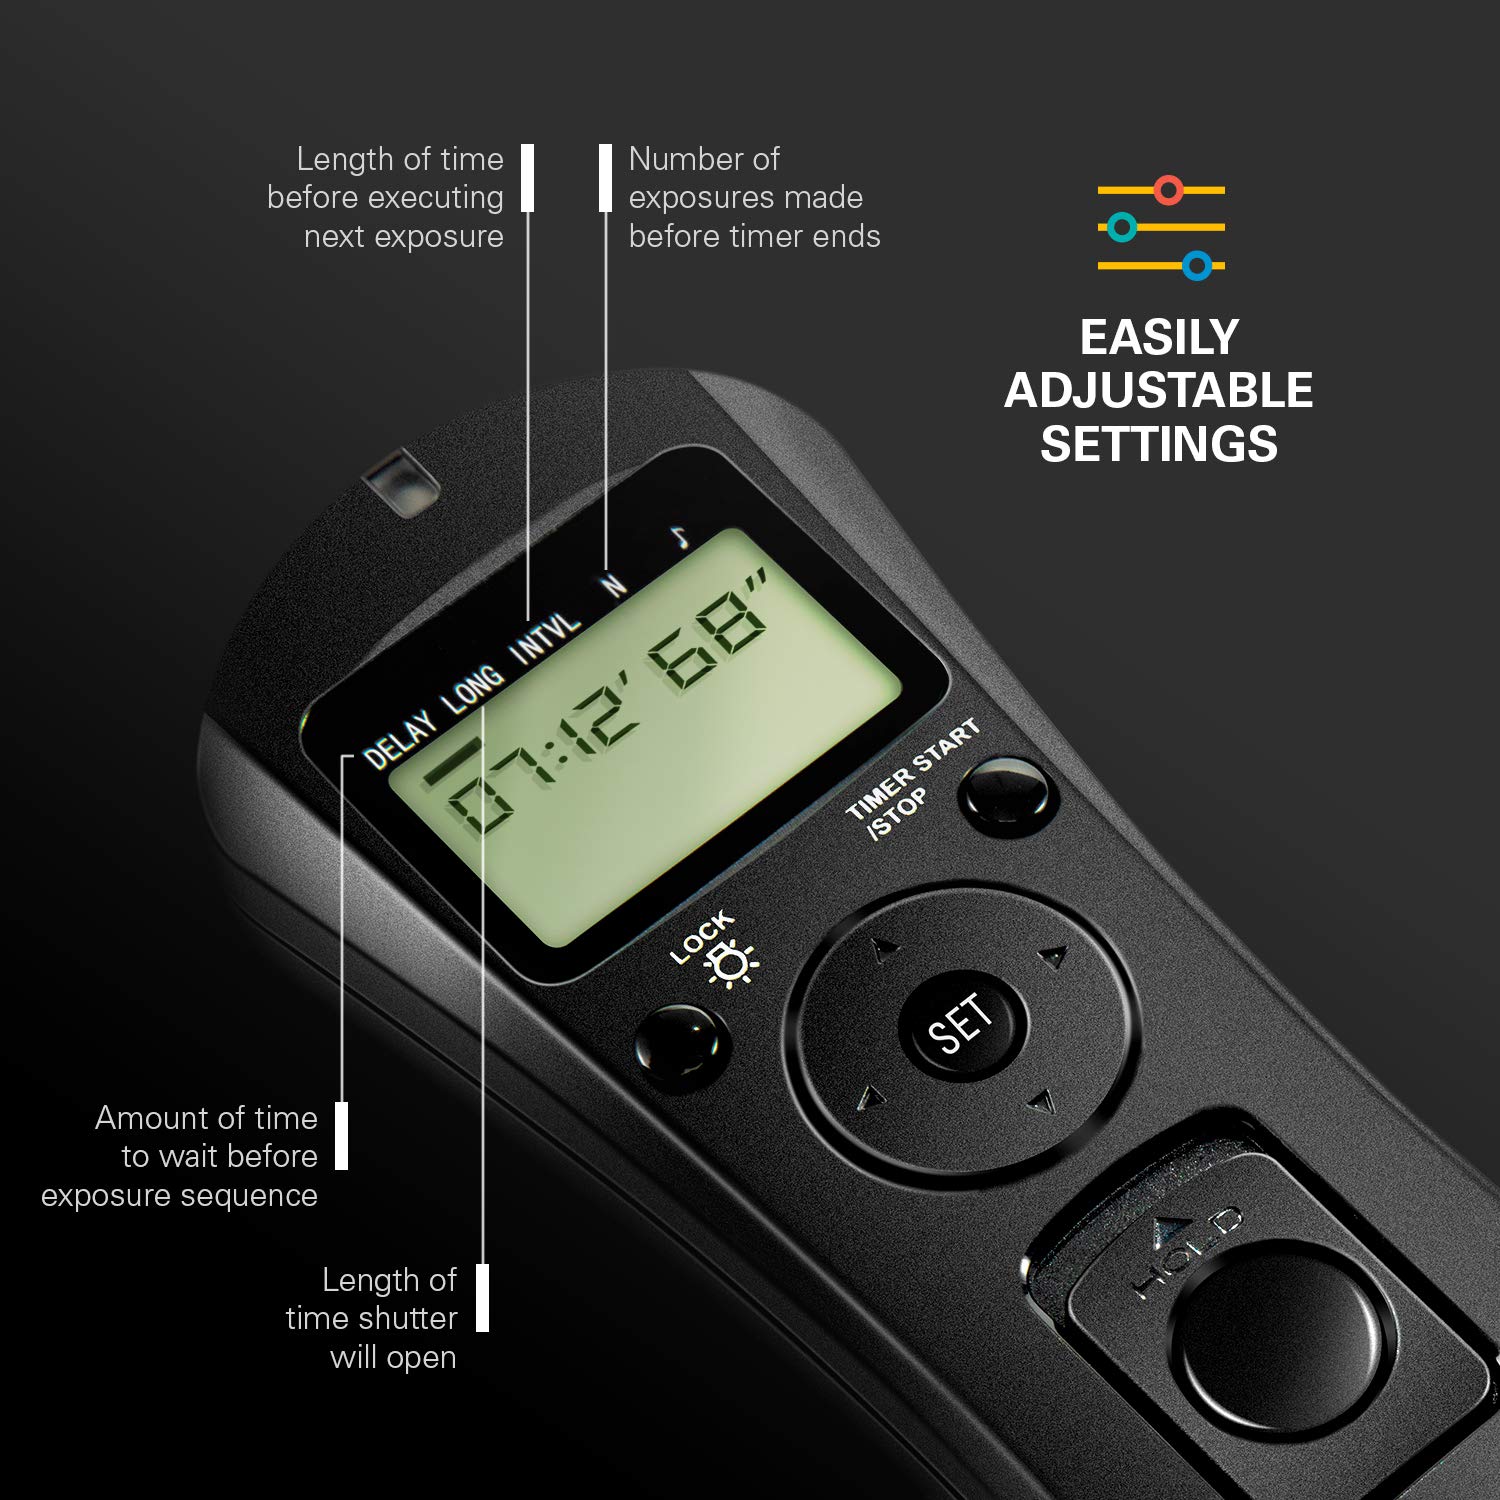 Polaroid Wireless Camera Shutter Remote w/Interval Timer - Includes Receiver, Handheld Transmitter w/Backlit Display & Connector Cable - Transmitter Enables Shooting Mode Switching w/o Need of Adjusting Camera Settings - Battery Operated For Nikon D90, D3